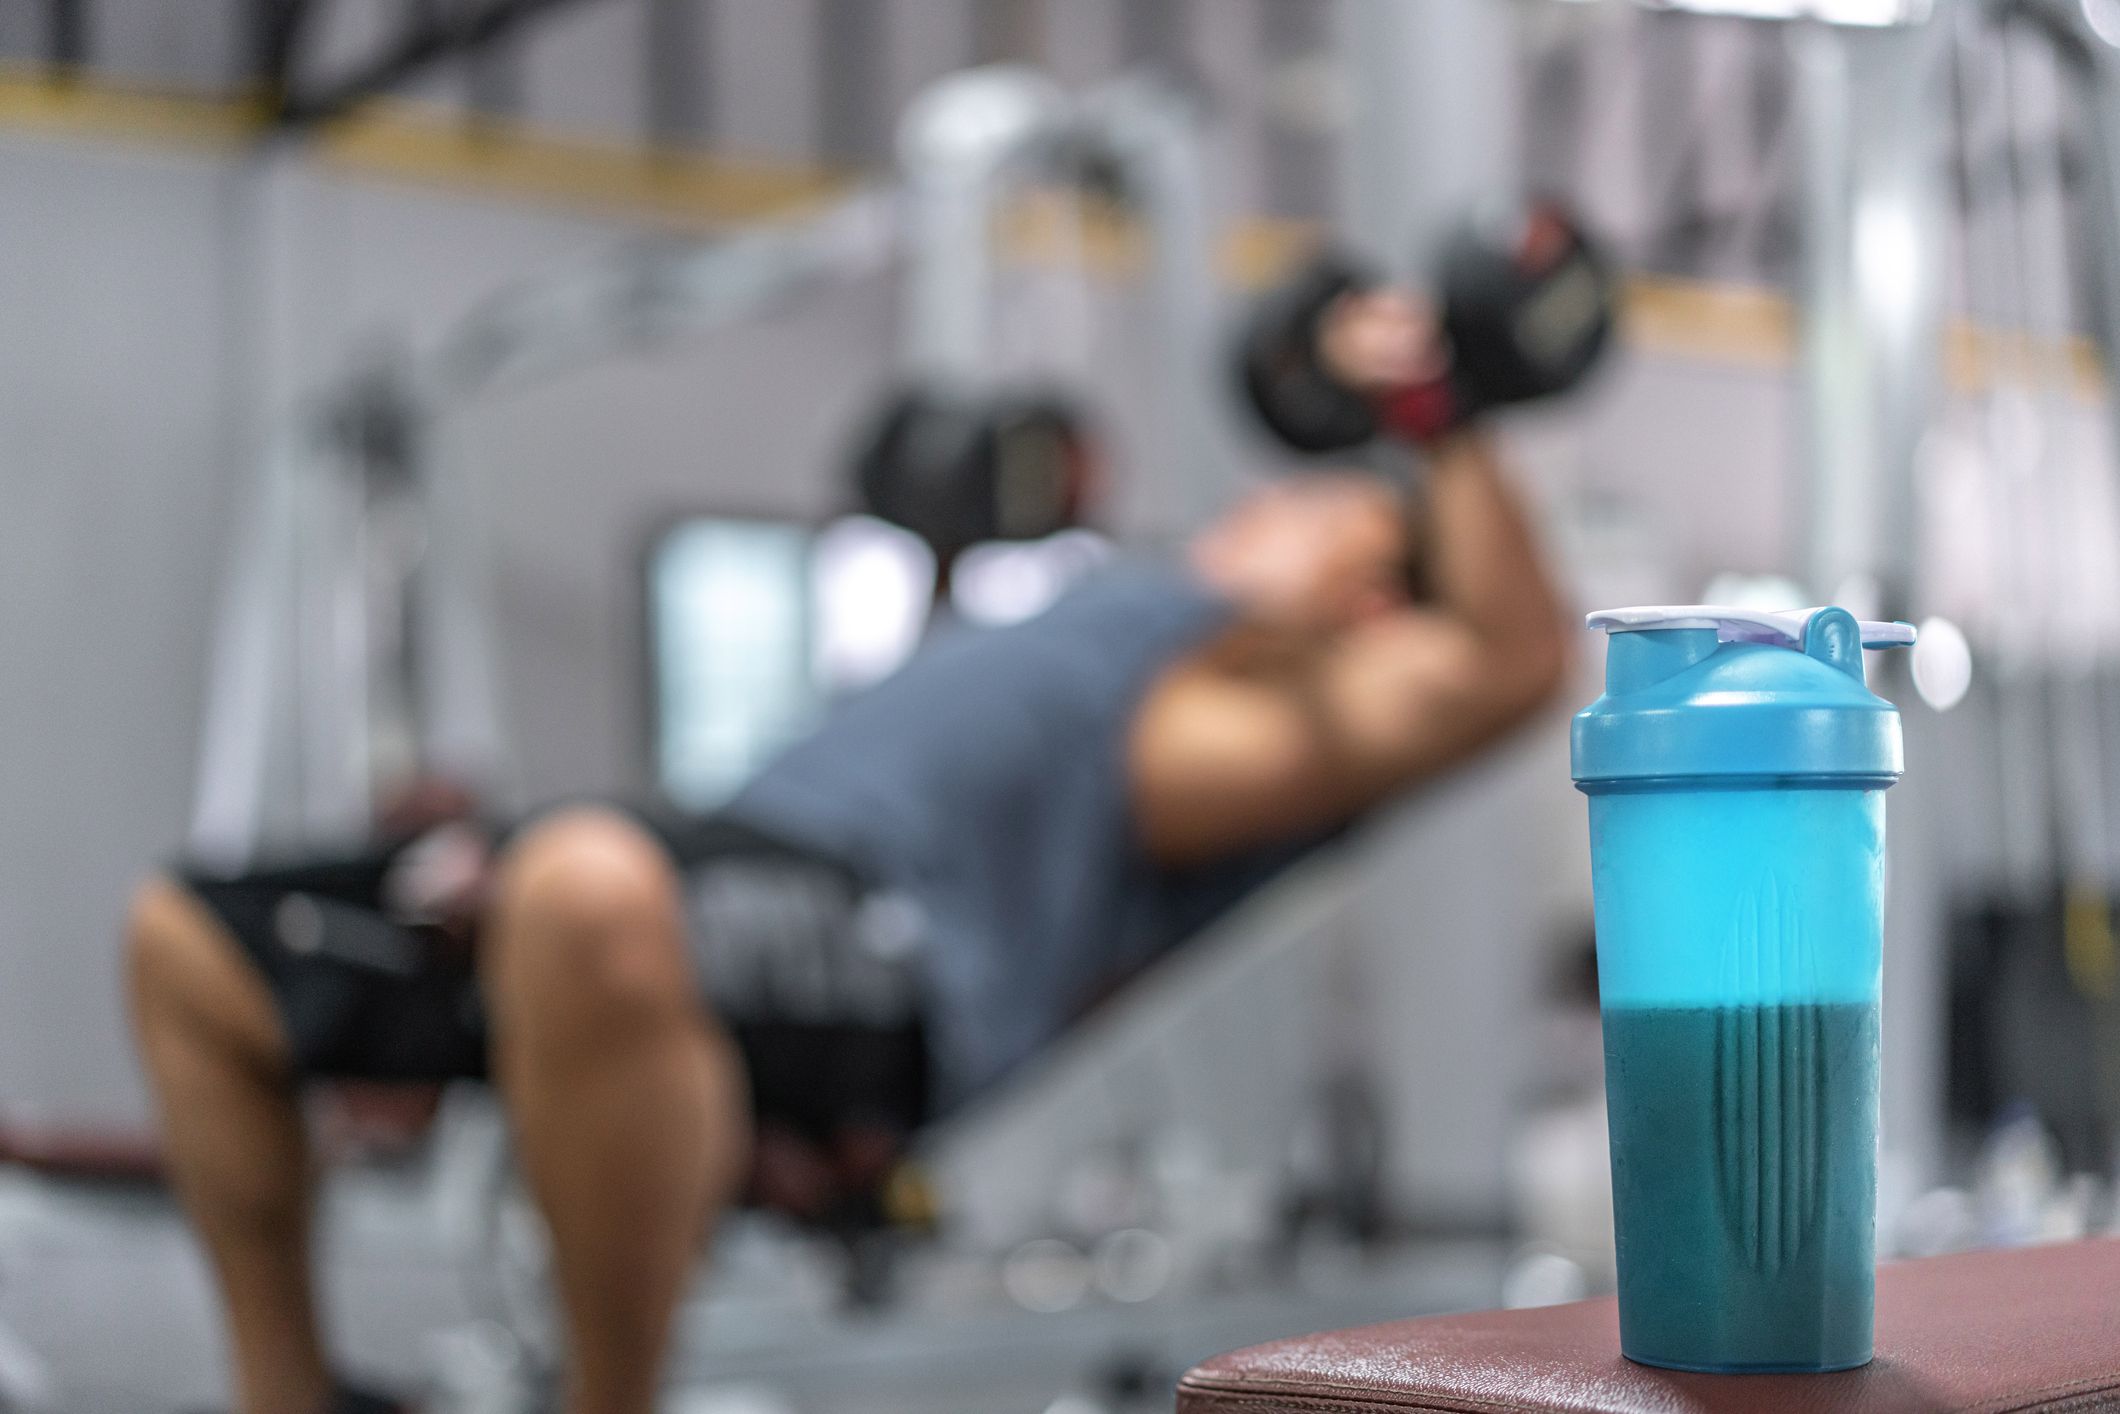 Bodybuilding and Performance Enhancement Supplements